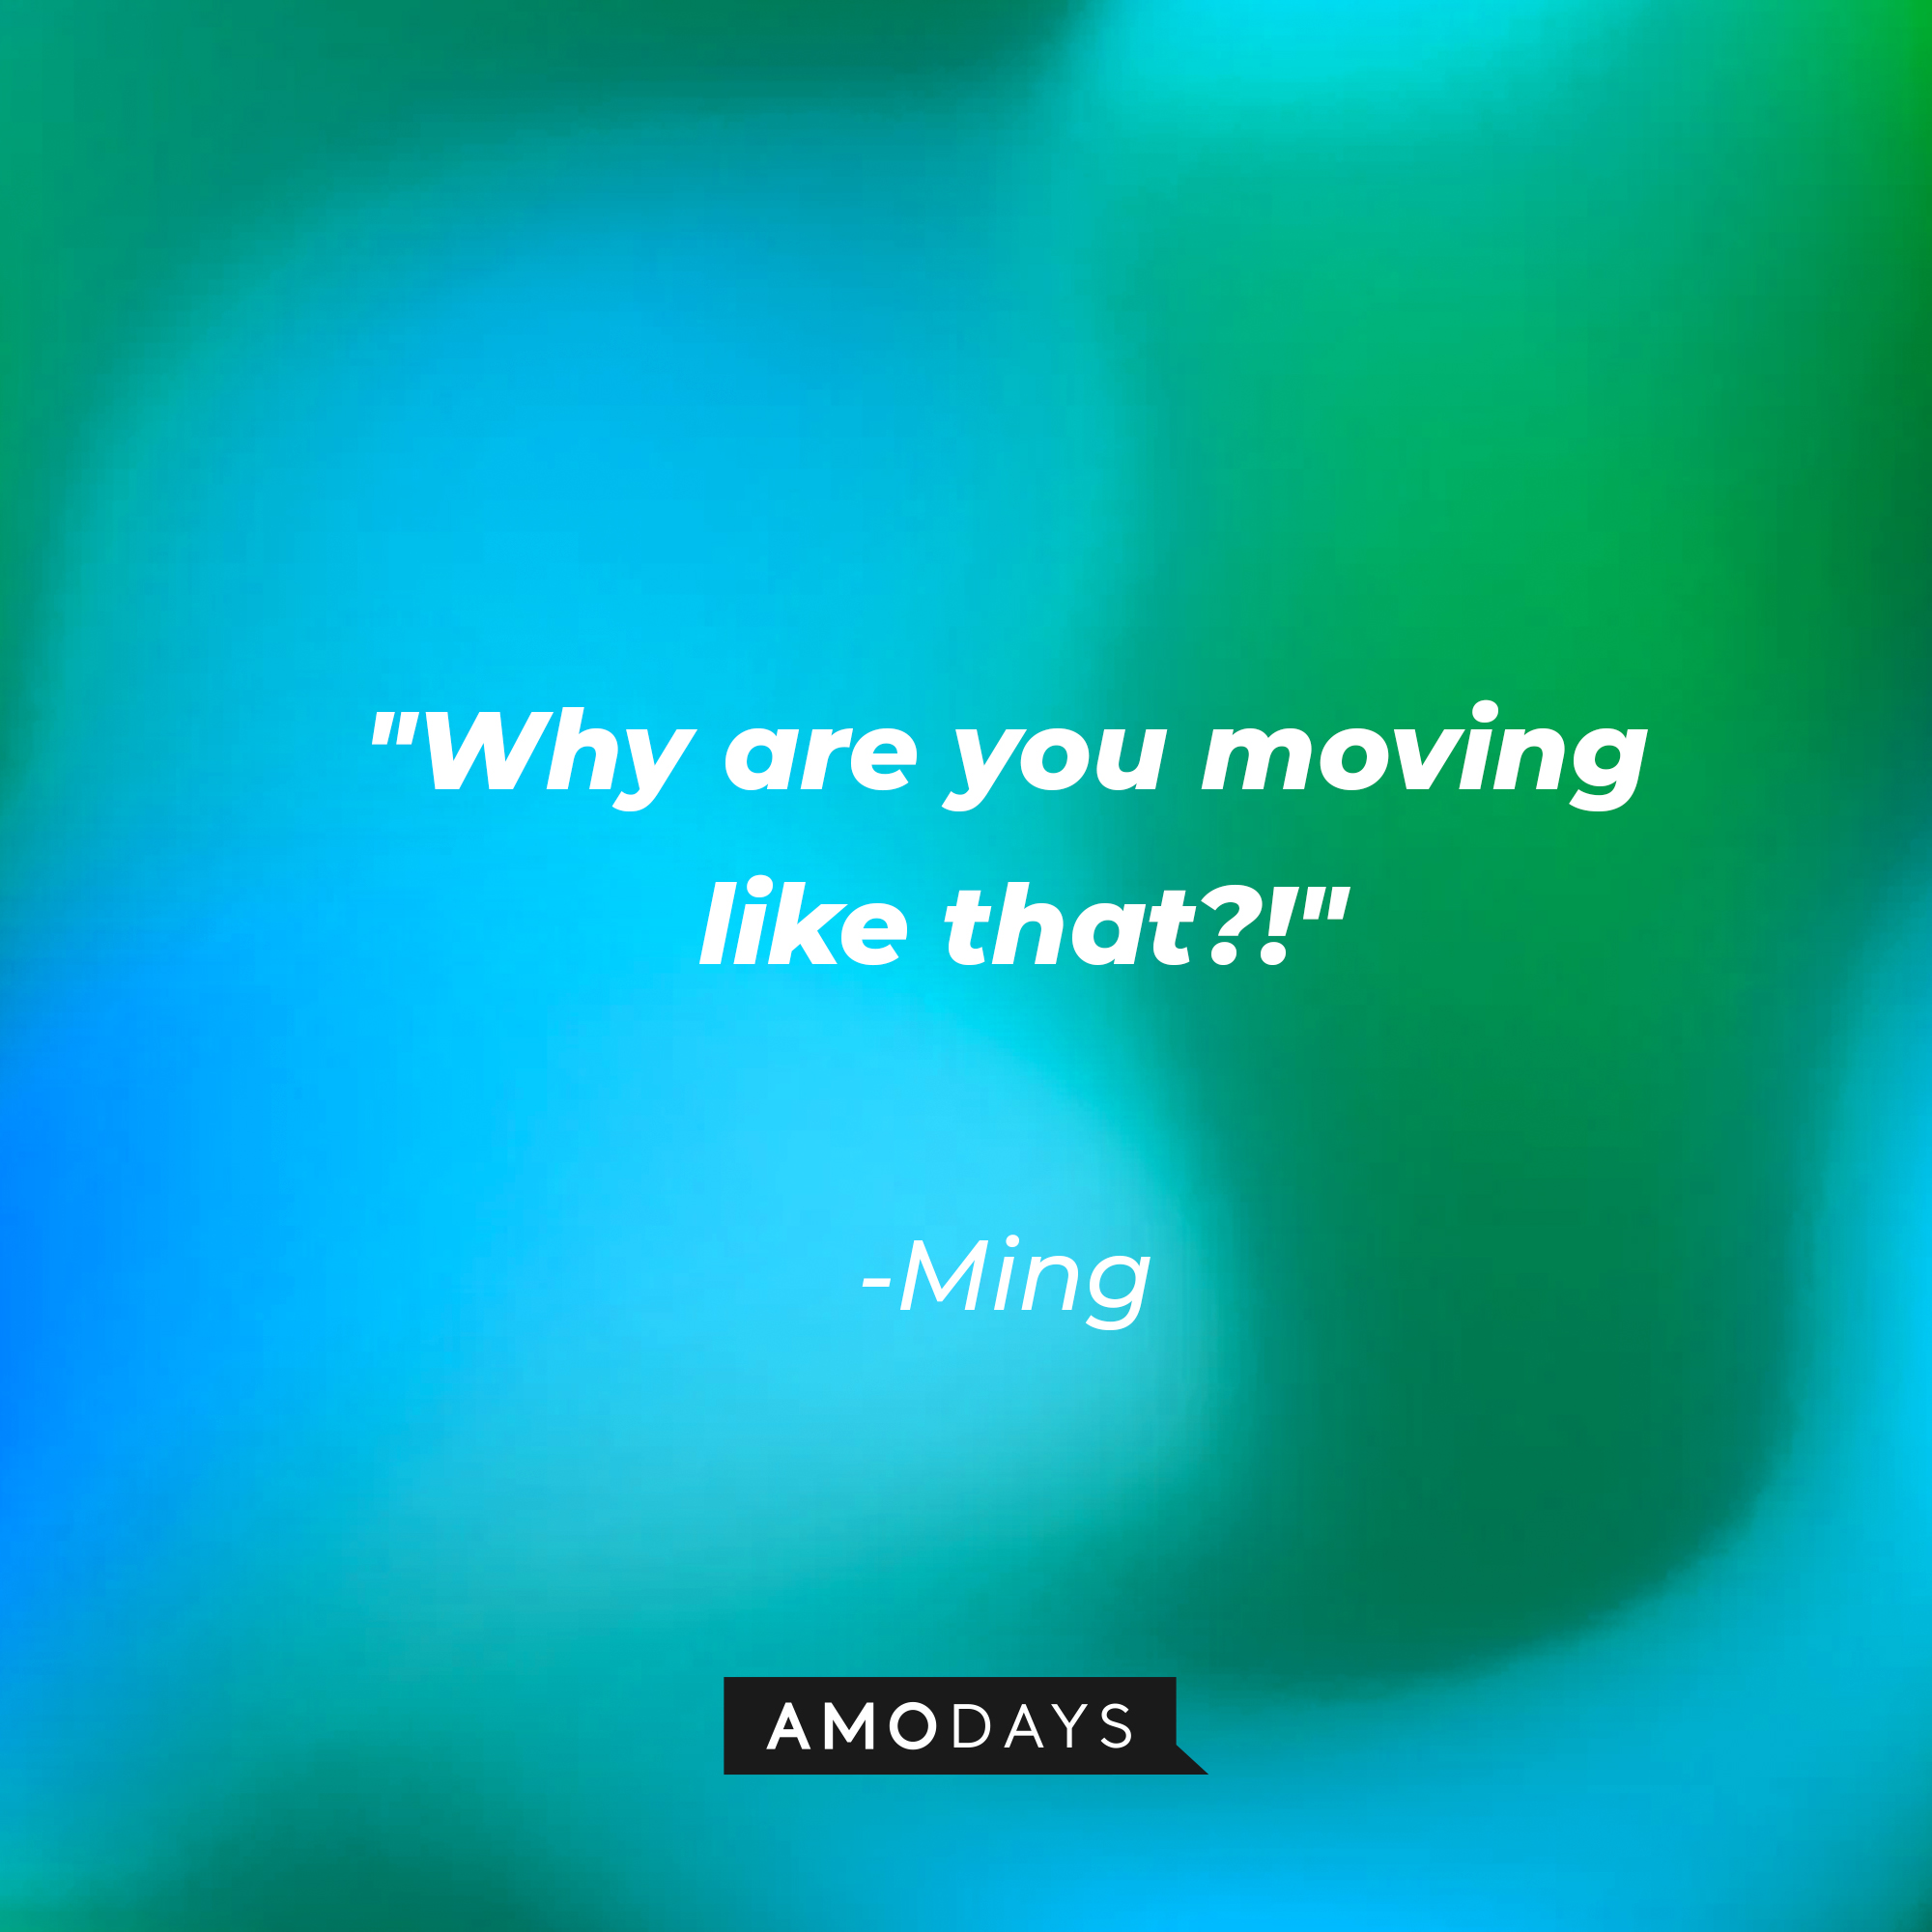 Ming's quote: "Why are you moving like that?!" | Source: AmoDays